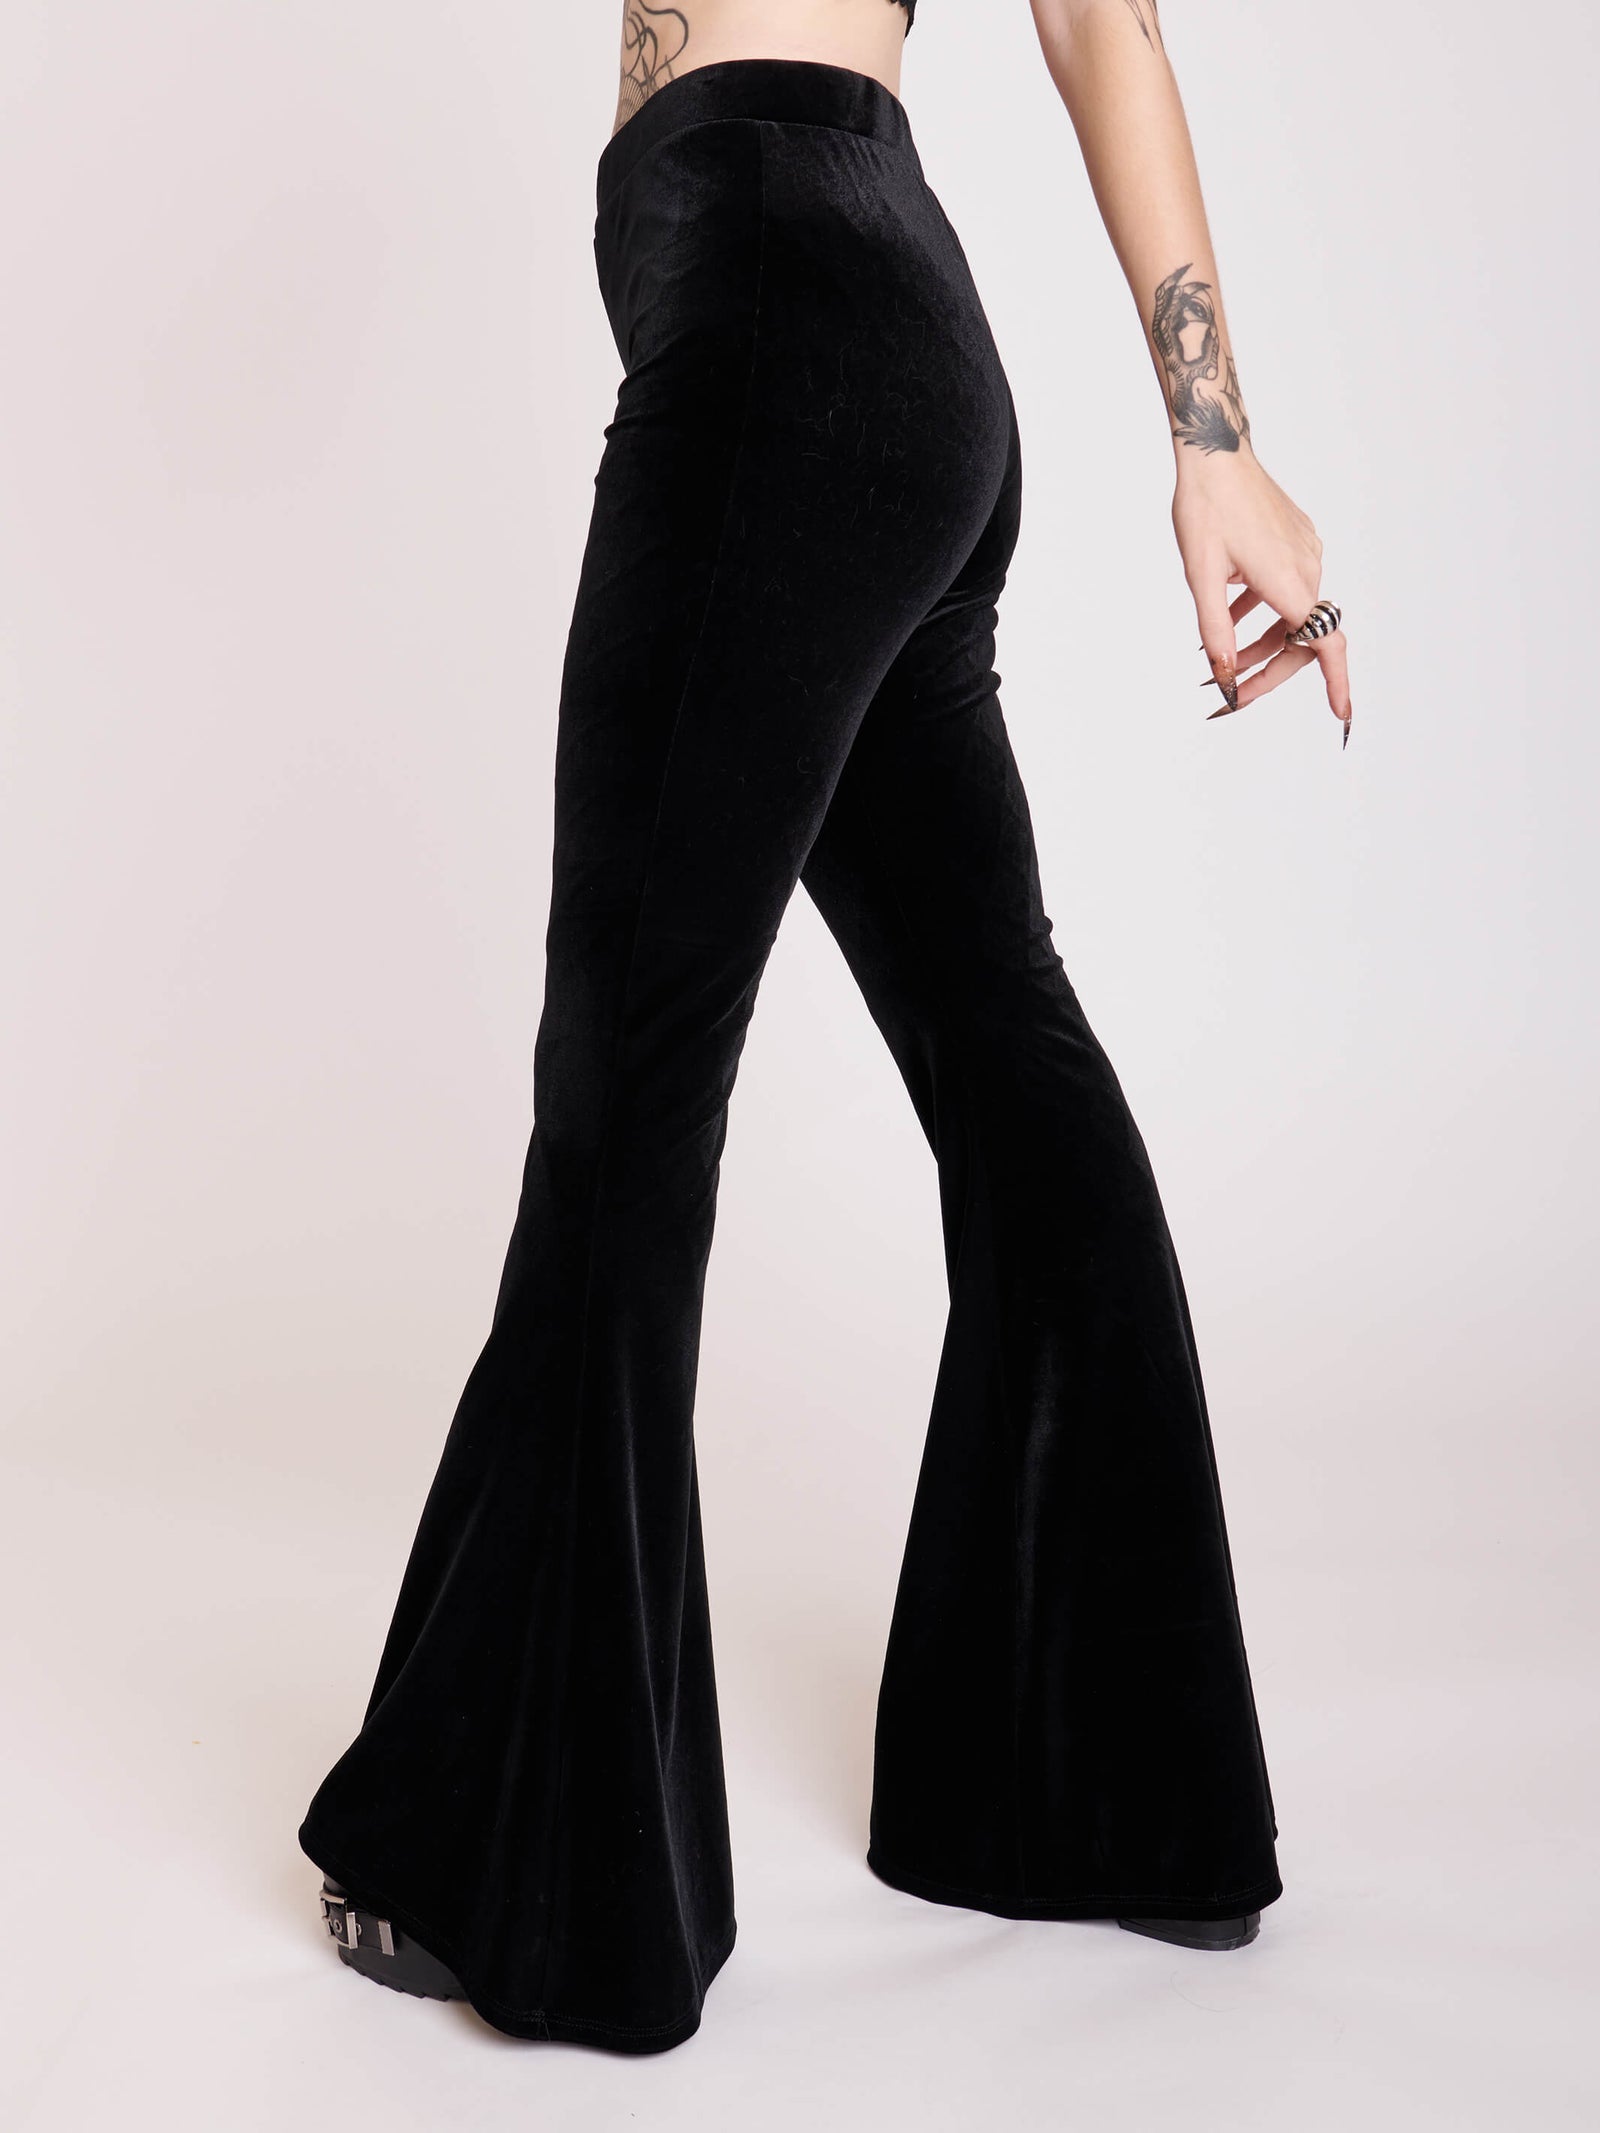 Hight Waist Bell Bottom Pants With Pockets. Goth Black Flare Pant. Black  Elastic Pant. Casual Black Trousers. Bell Bottom Leggings. Gothic -  UK